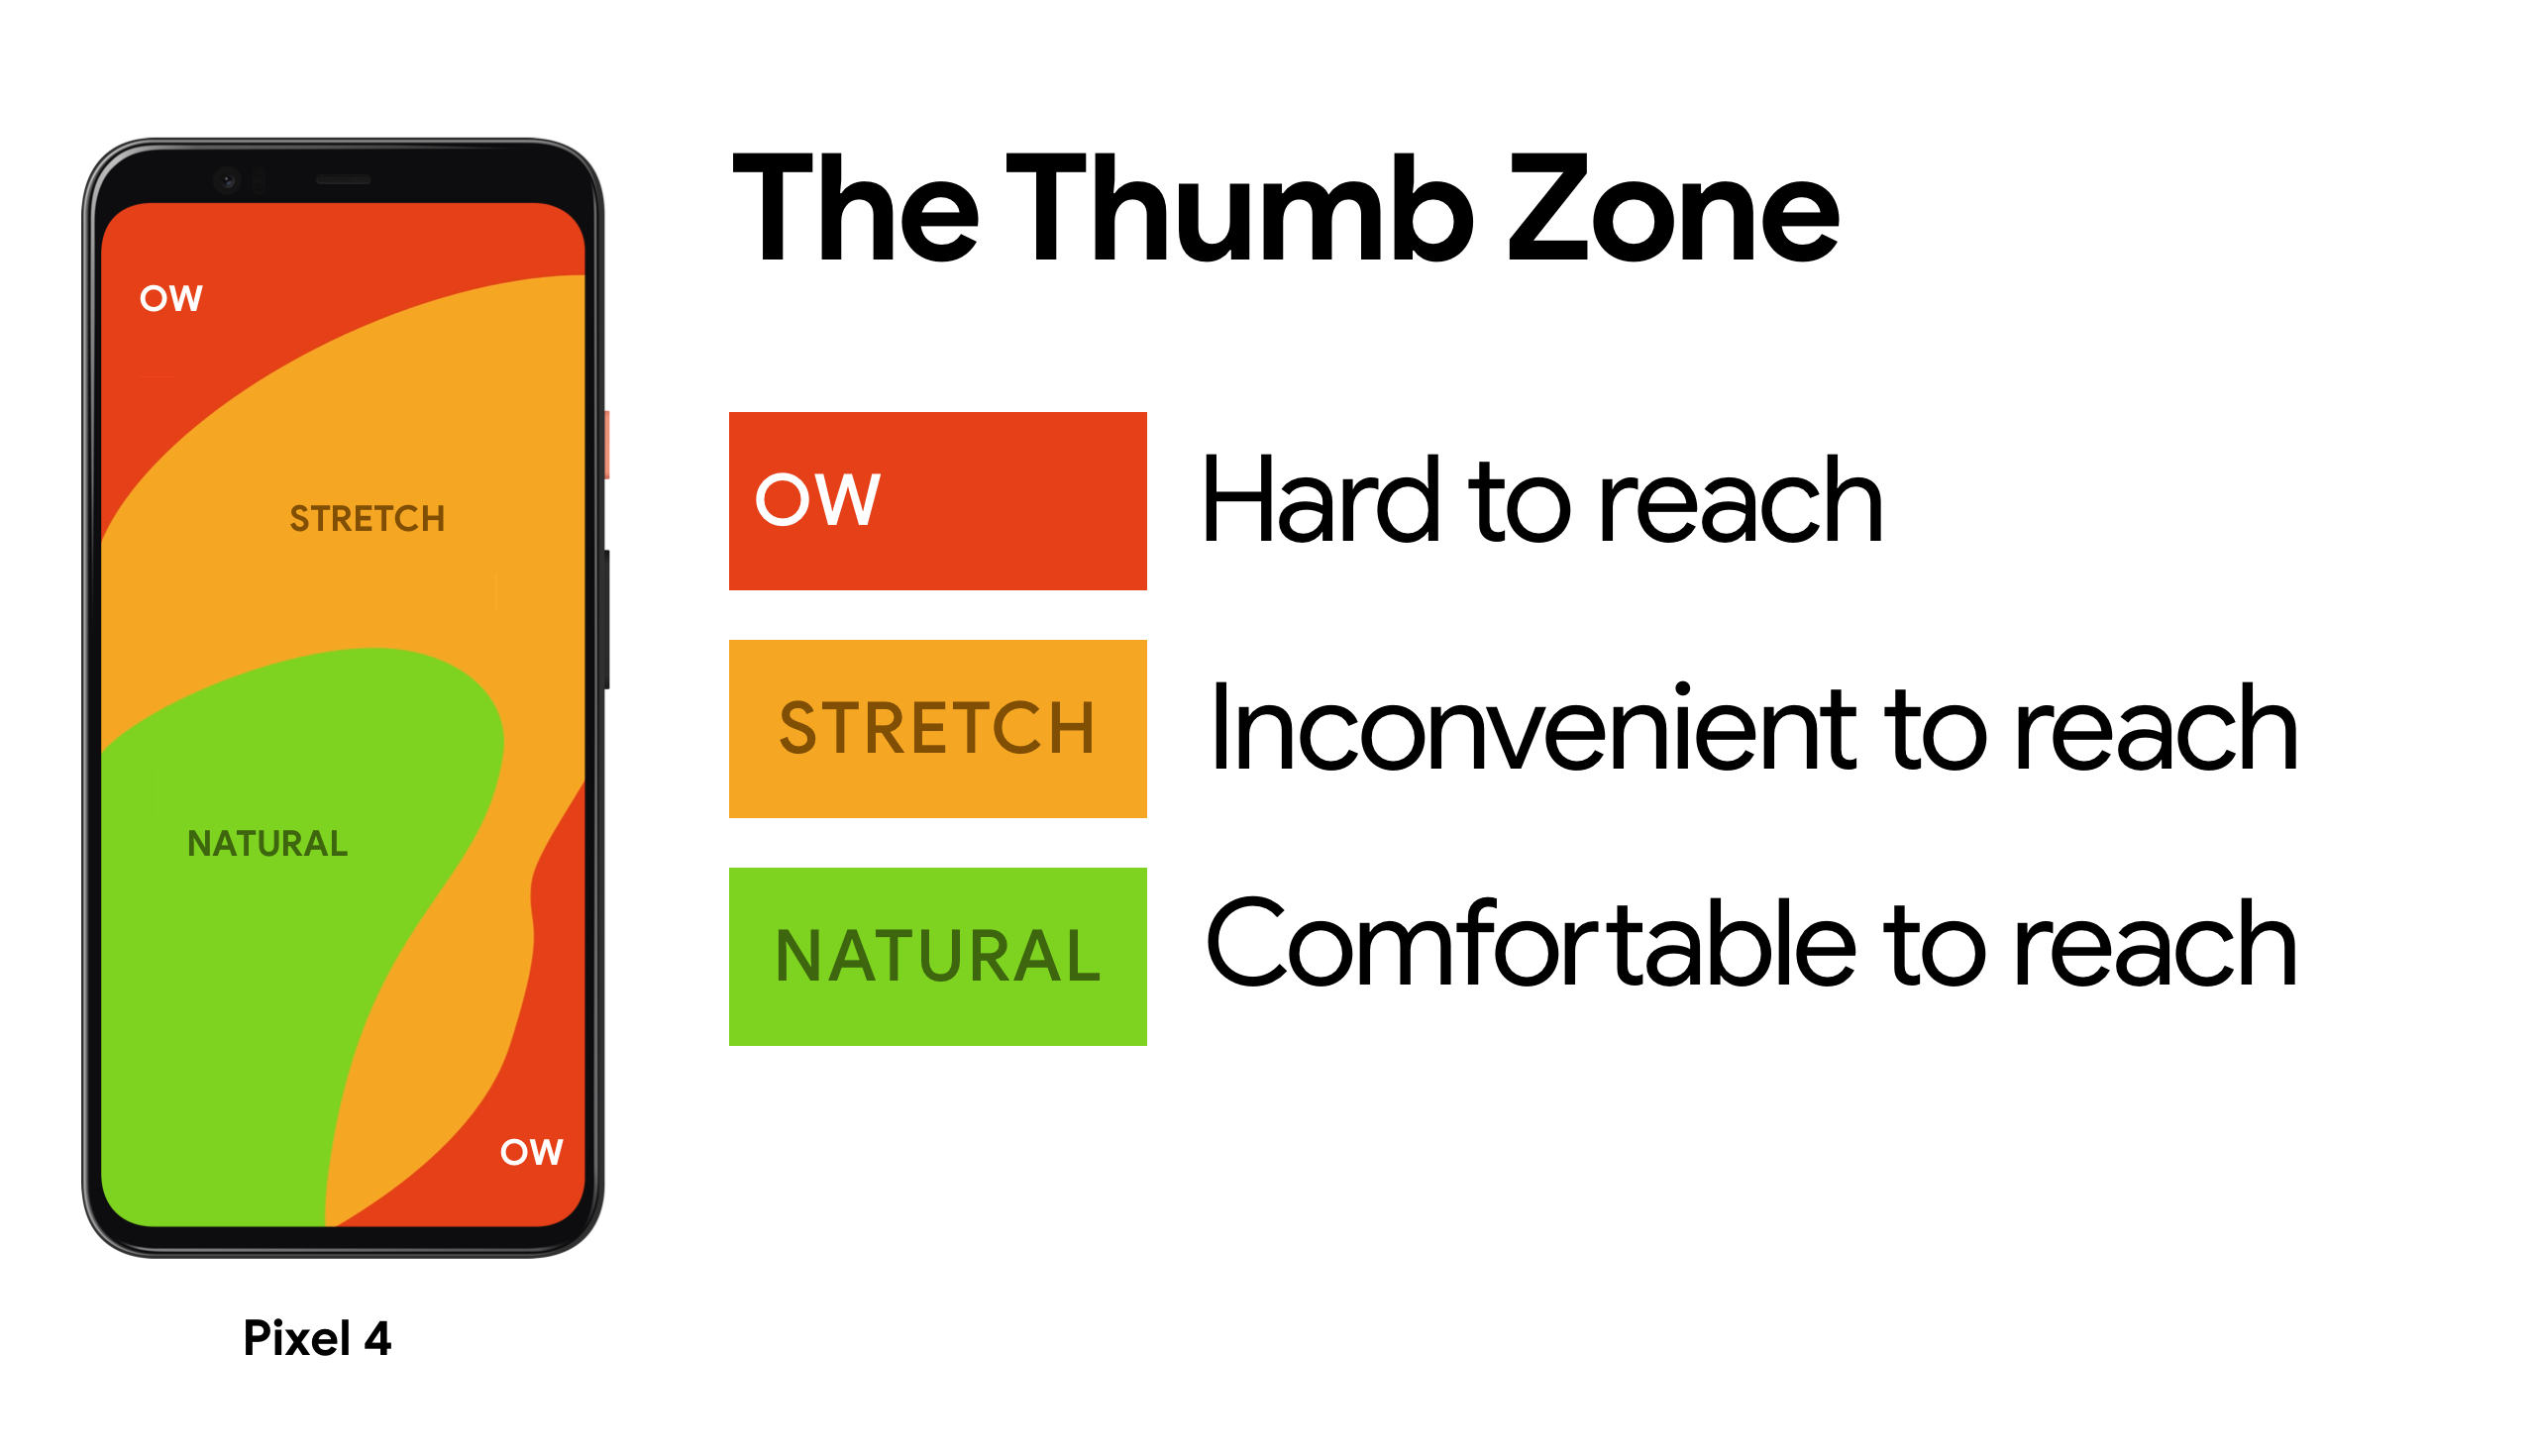 The Thumb Zone - easy to reach, inconvenient to reach, hard to reach